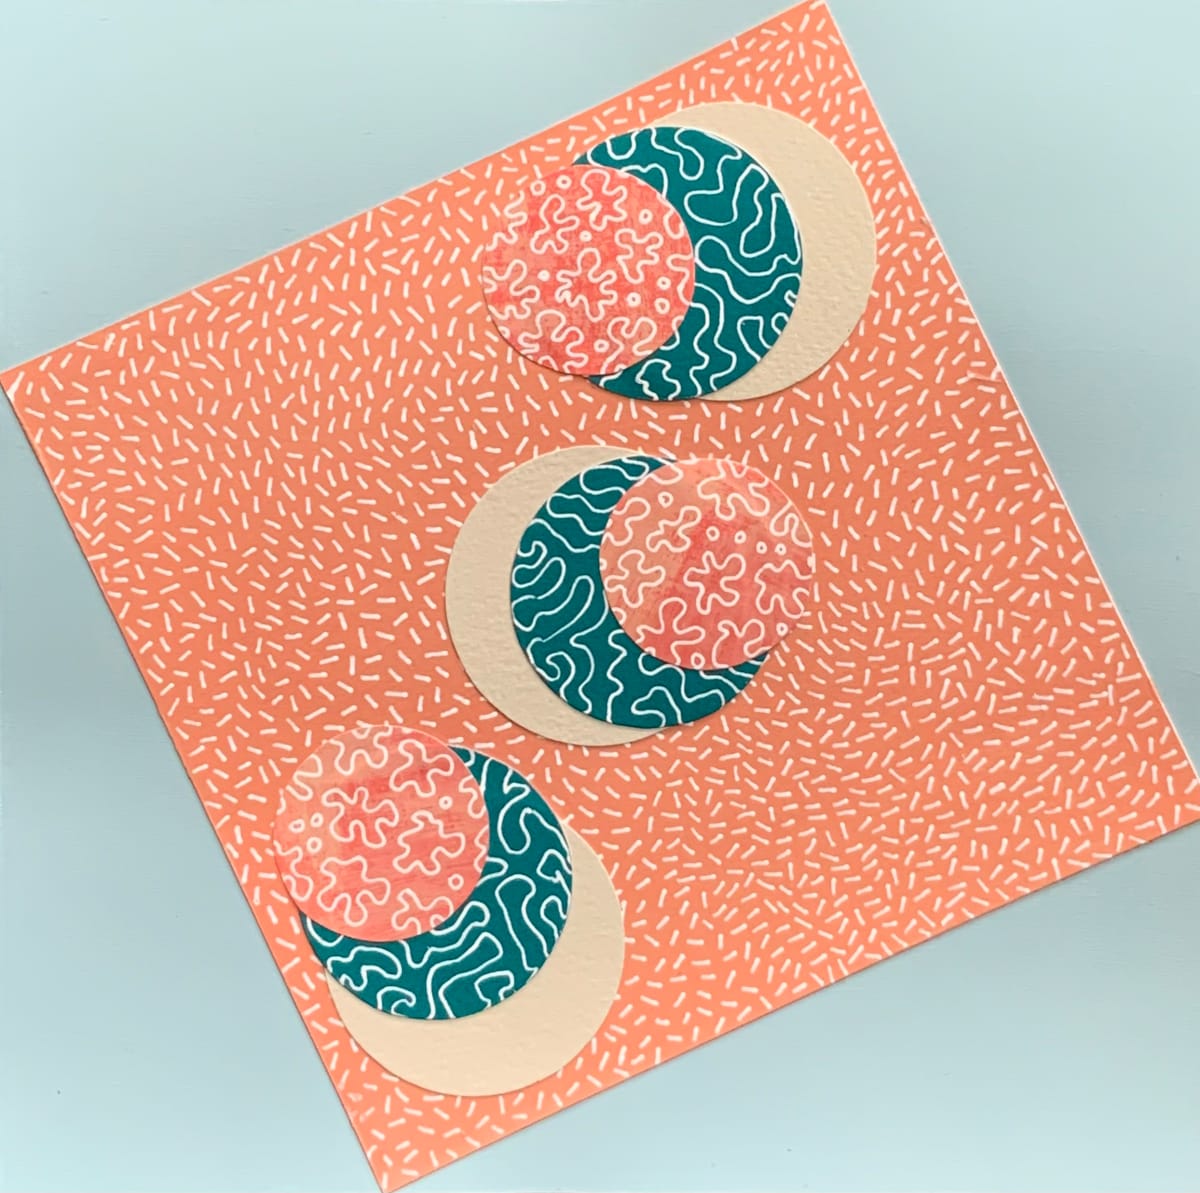 Dots 32, Baby Blue + Peach Pattern, Tan, Teal & Salmon Pattern by Suzanne Gibbs  Image: Dots 32, Baby Blue + Peach Pattern, Tan, Teal & Salmon Pattern, Mixed Media Work on Paper, 8 x 8 inches.